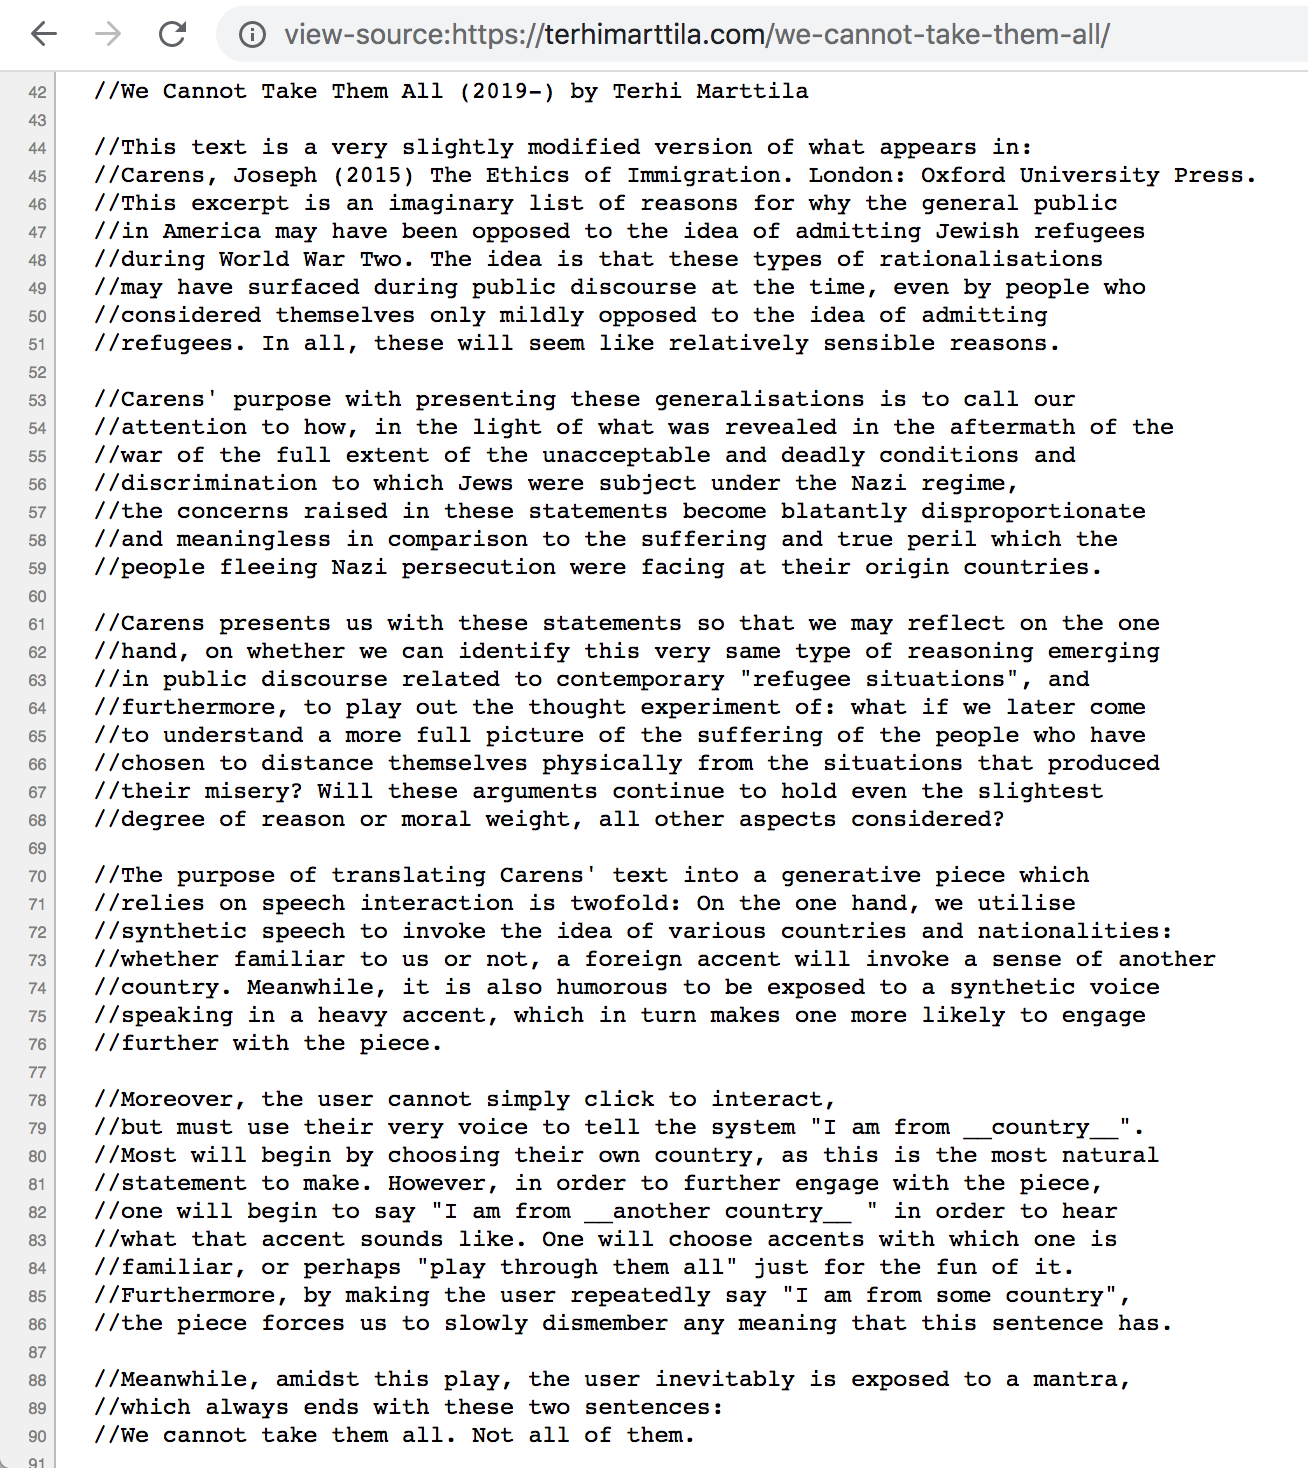 A screenshot of the artist statement of We cannot take them all (2019), in the comments of the code